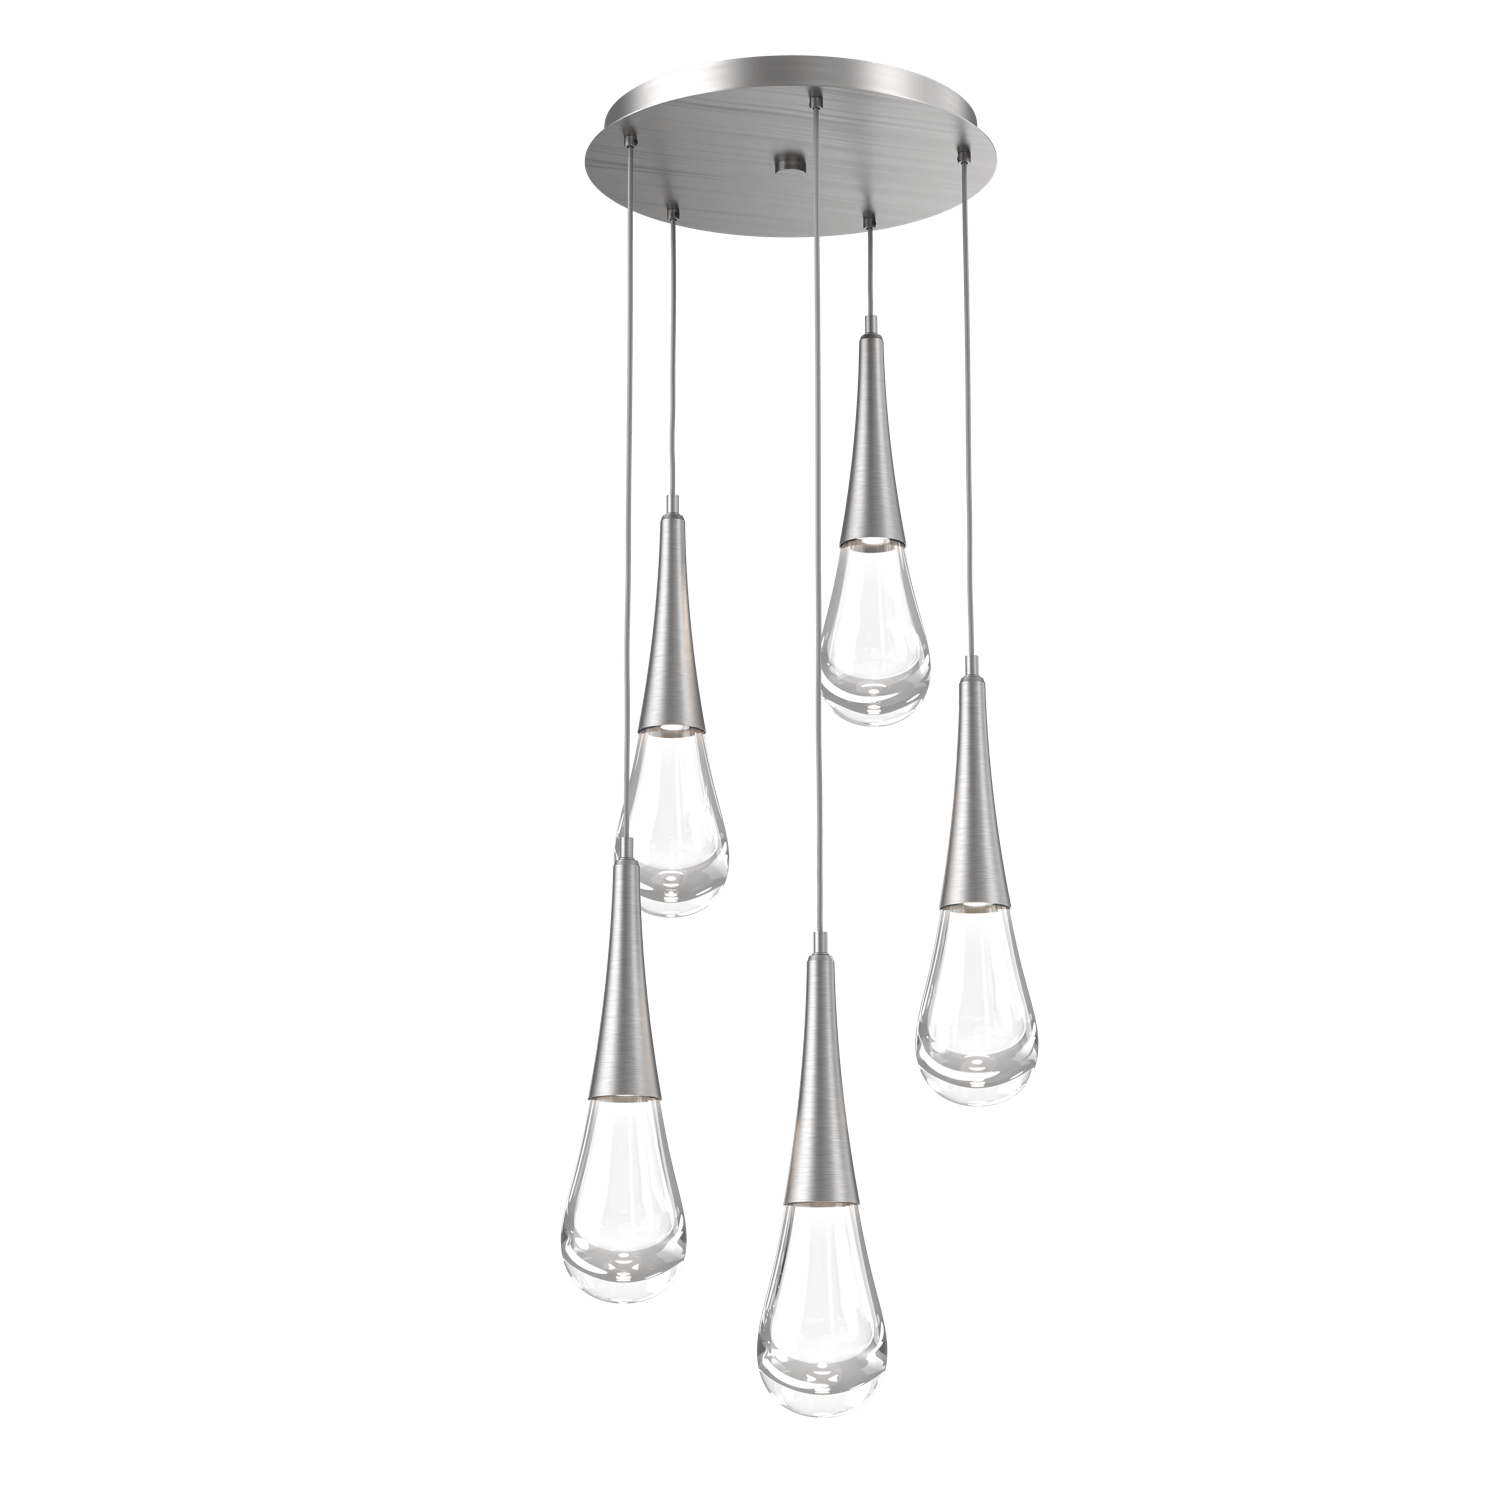 CHB0078-05-SN-Hammerton-Studio-Raindrop-5-light-round-pendant-chandelier-with-satin-nickel-finish-and-clear-blown-glass-shades-and-LED-lamping